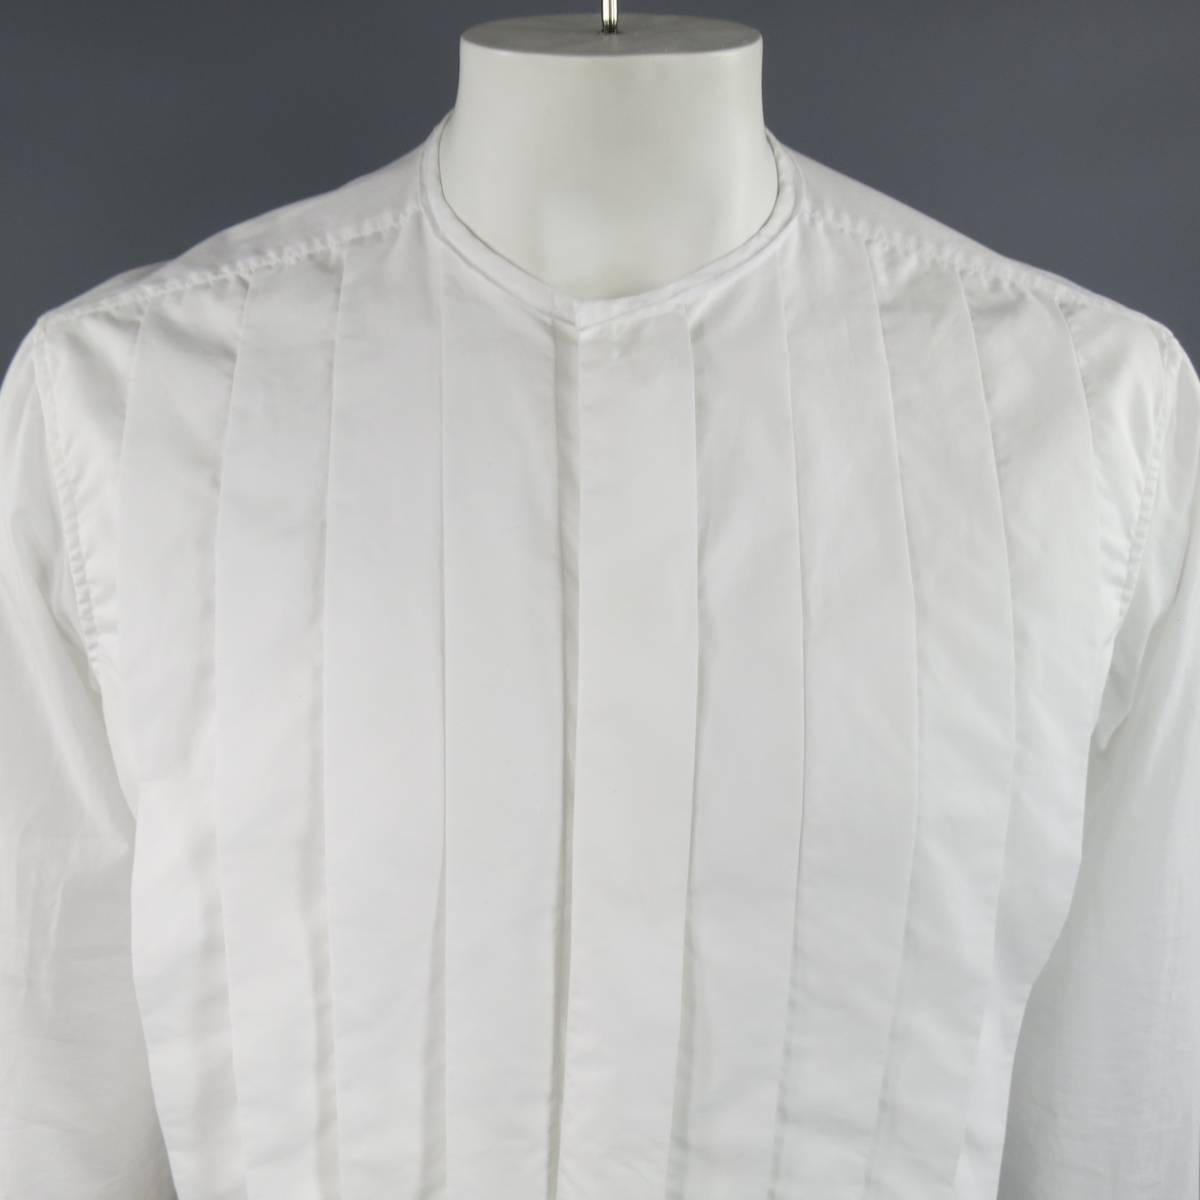 LANVIN Long Sleeve Shirt consists of cotton material in a white color tone. Designed with a collarless neck line, single button cuffs and tone-on-tone stitching throughout seams. Detailed with an oversized pleated front that also hides button-up